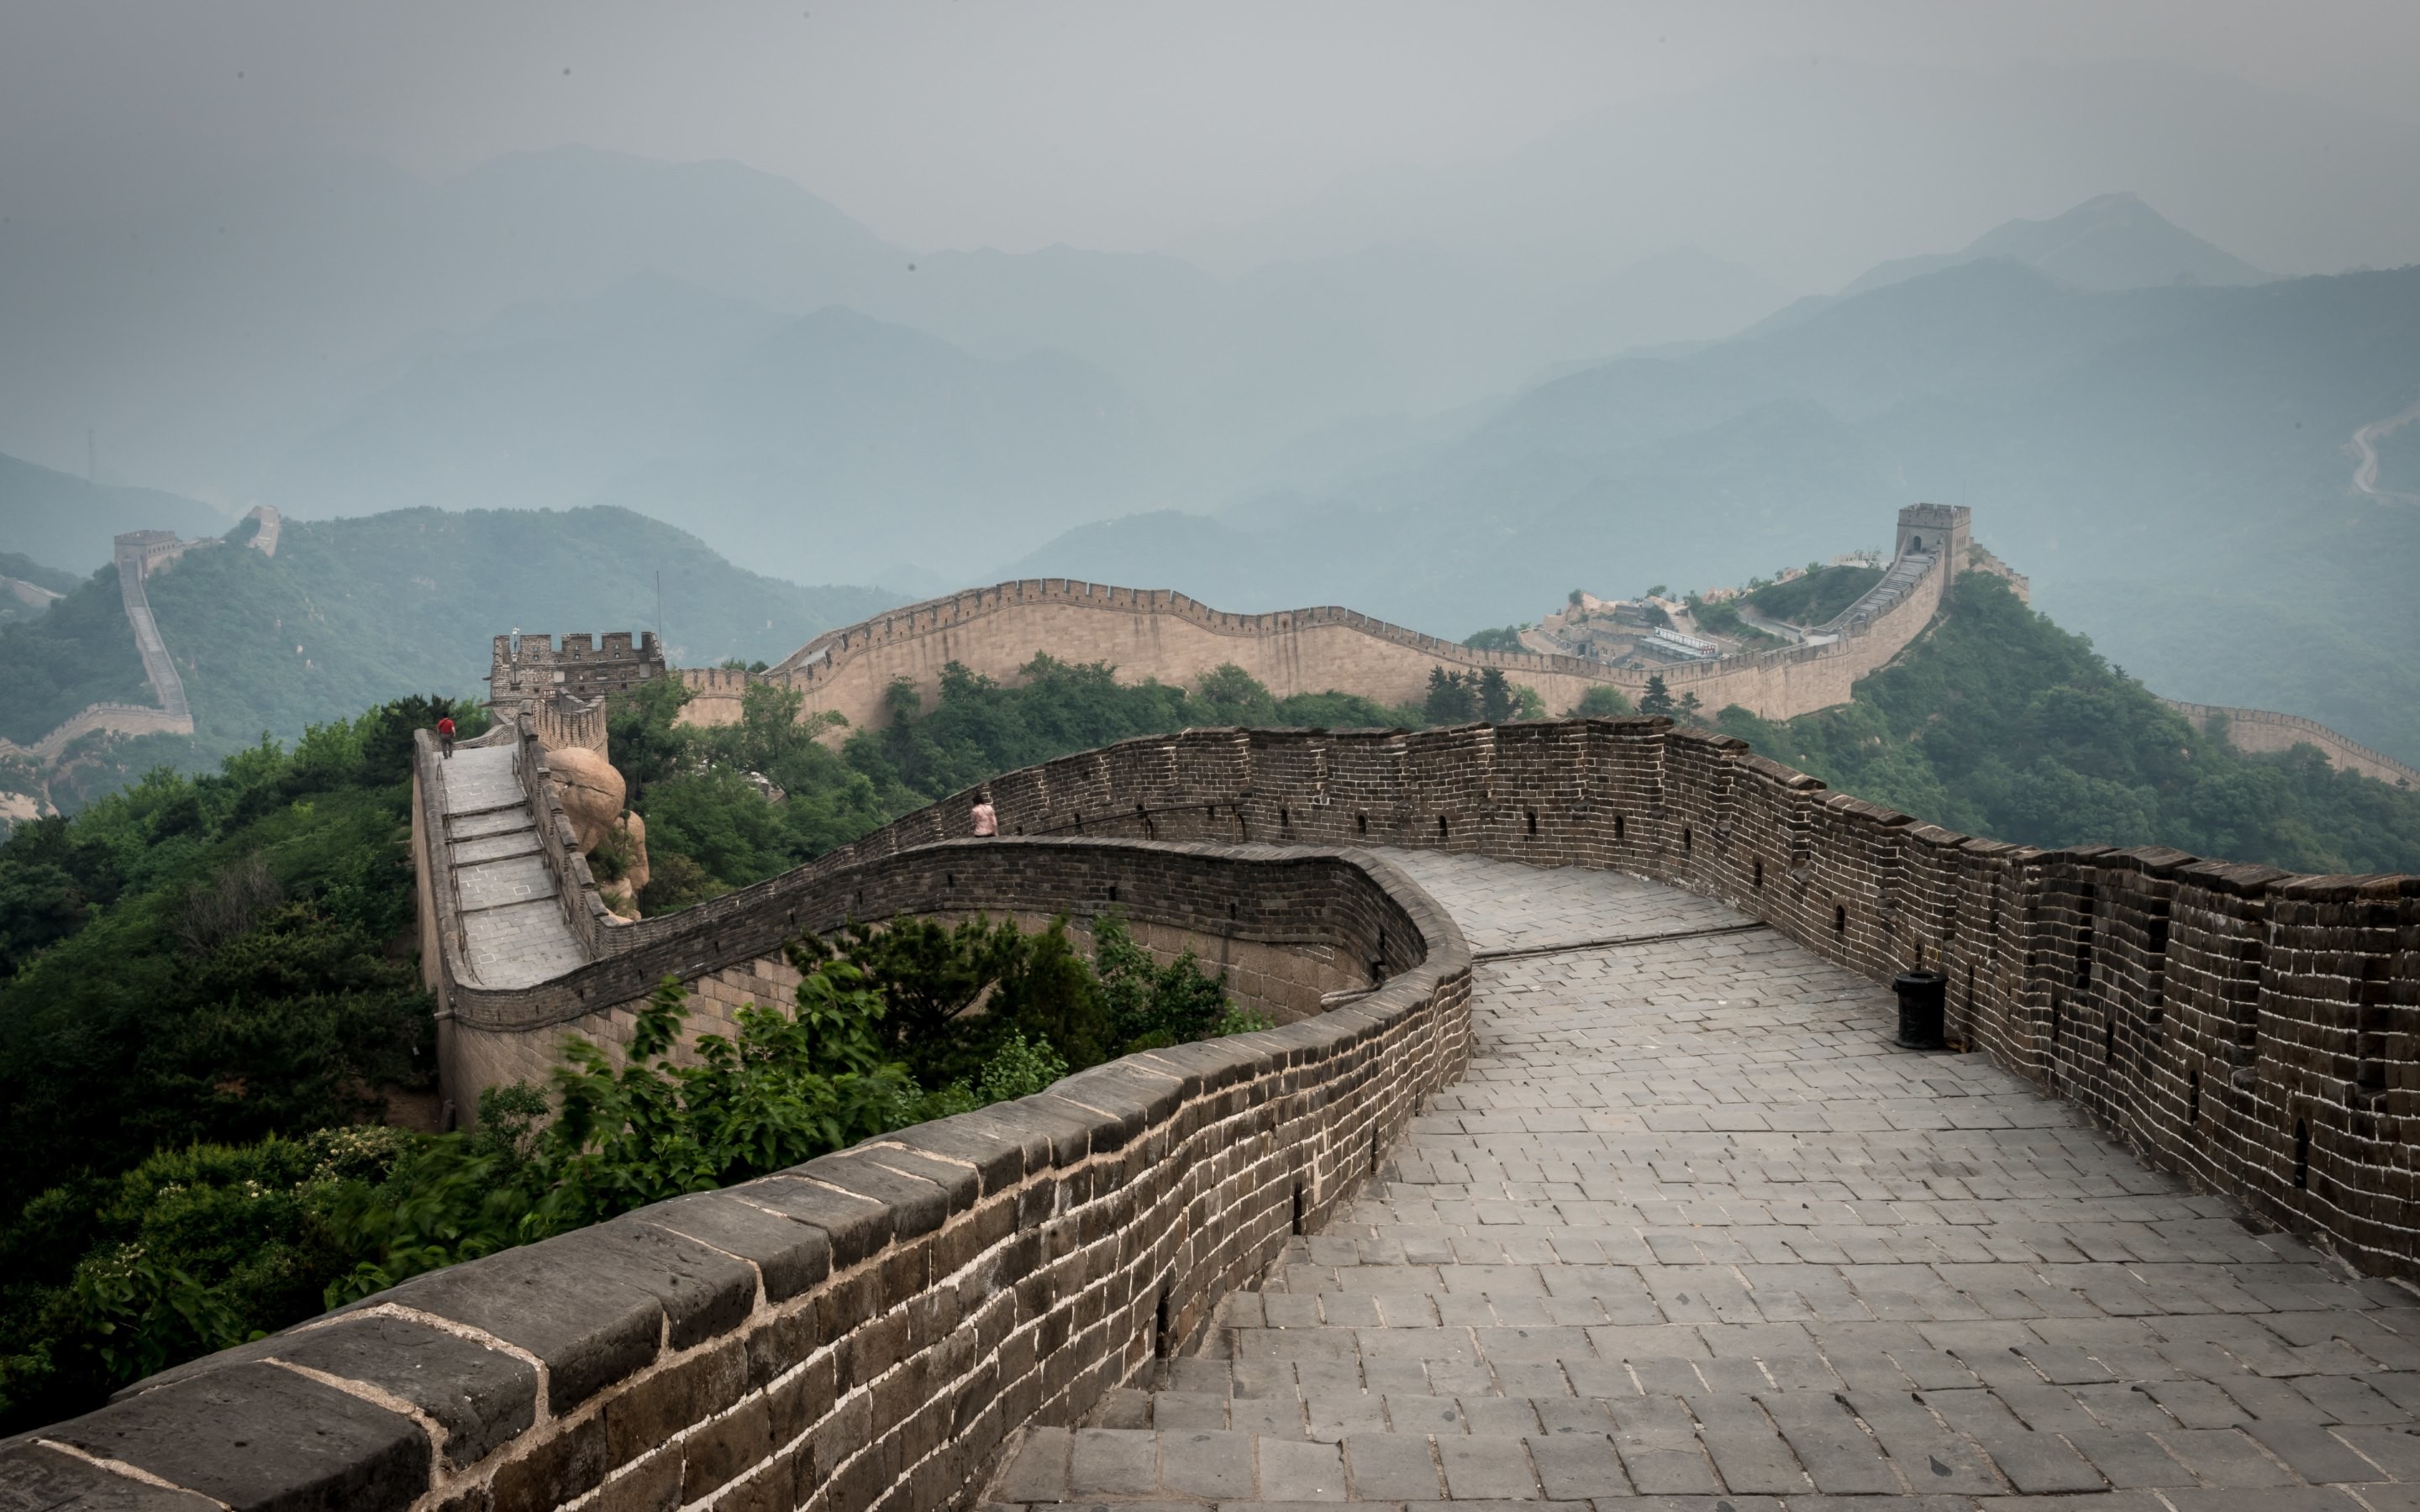 2880x1800 And the last Great Wall wallpaper is from Francesco Crippa and optimized  for download at 4K, HD and wide standards to fit in any modern screen